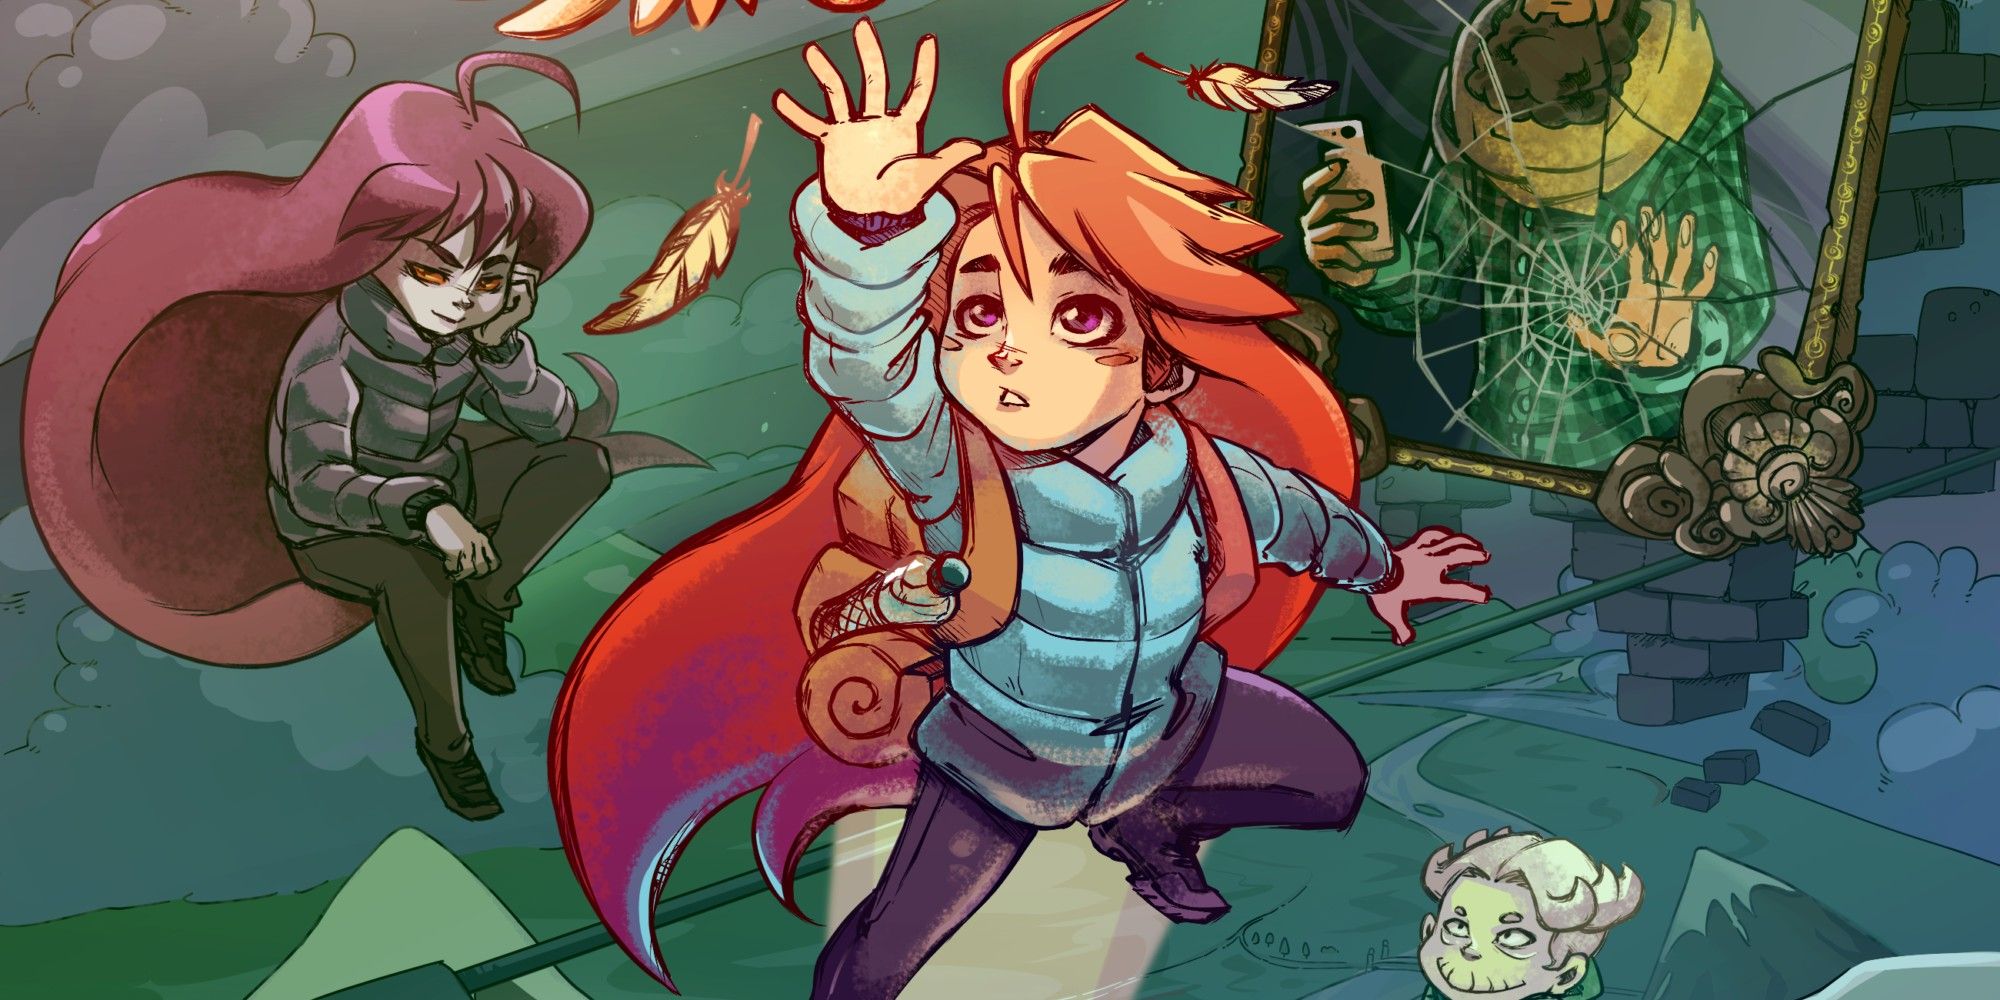 Celeste cover art featuring Madeline reaching for the air